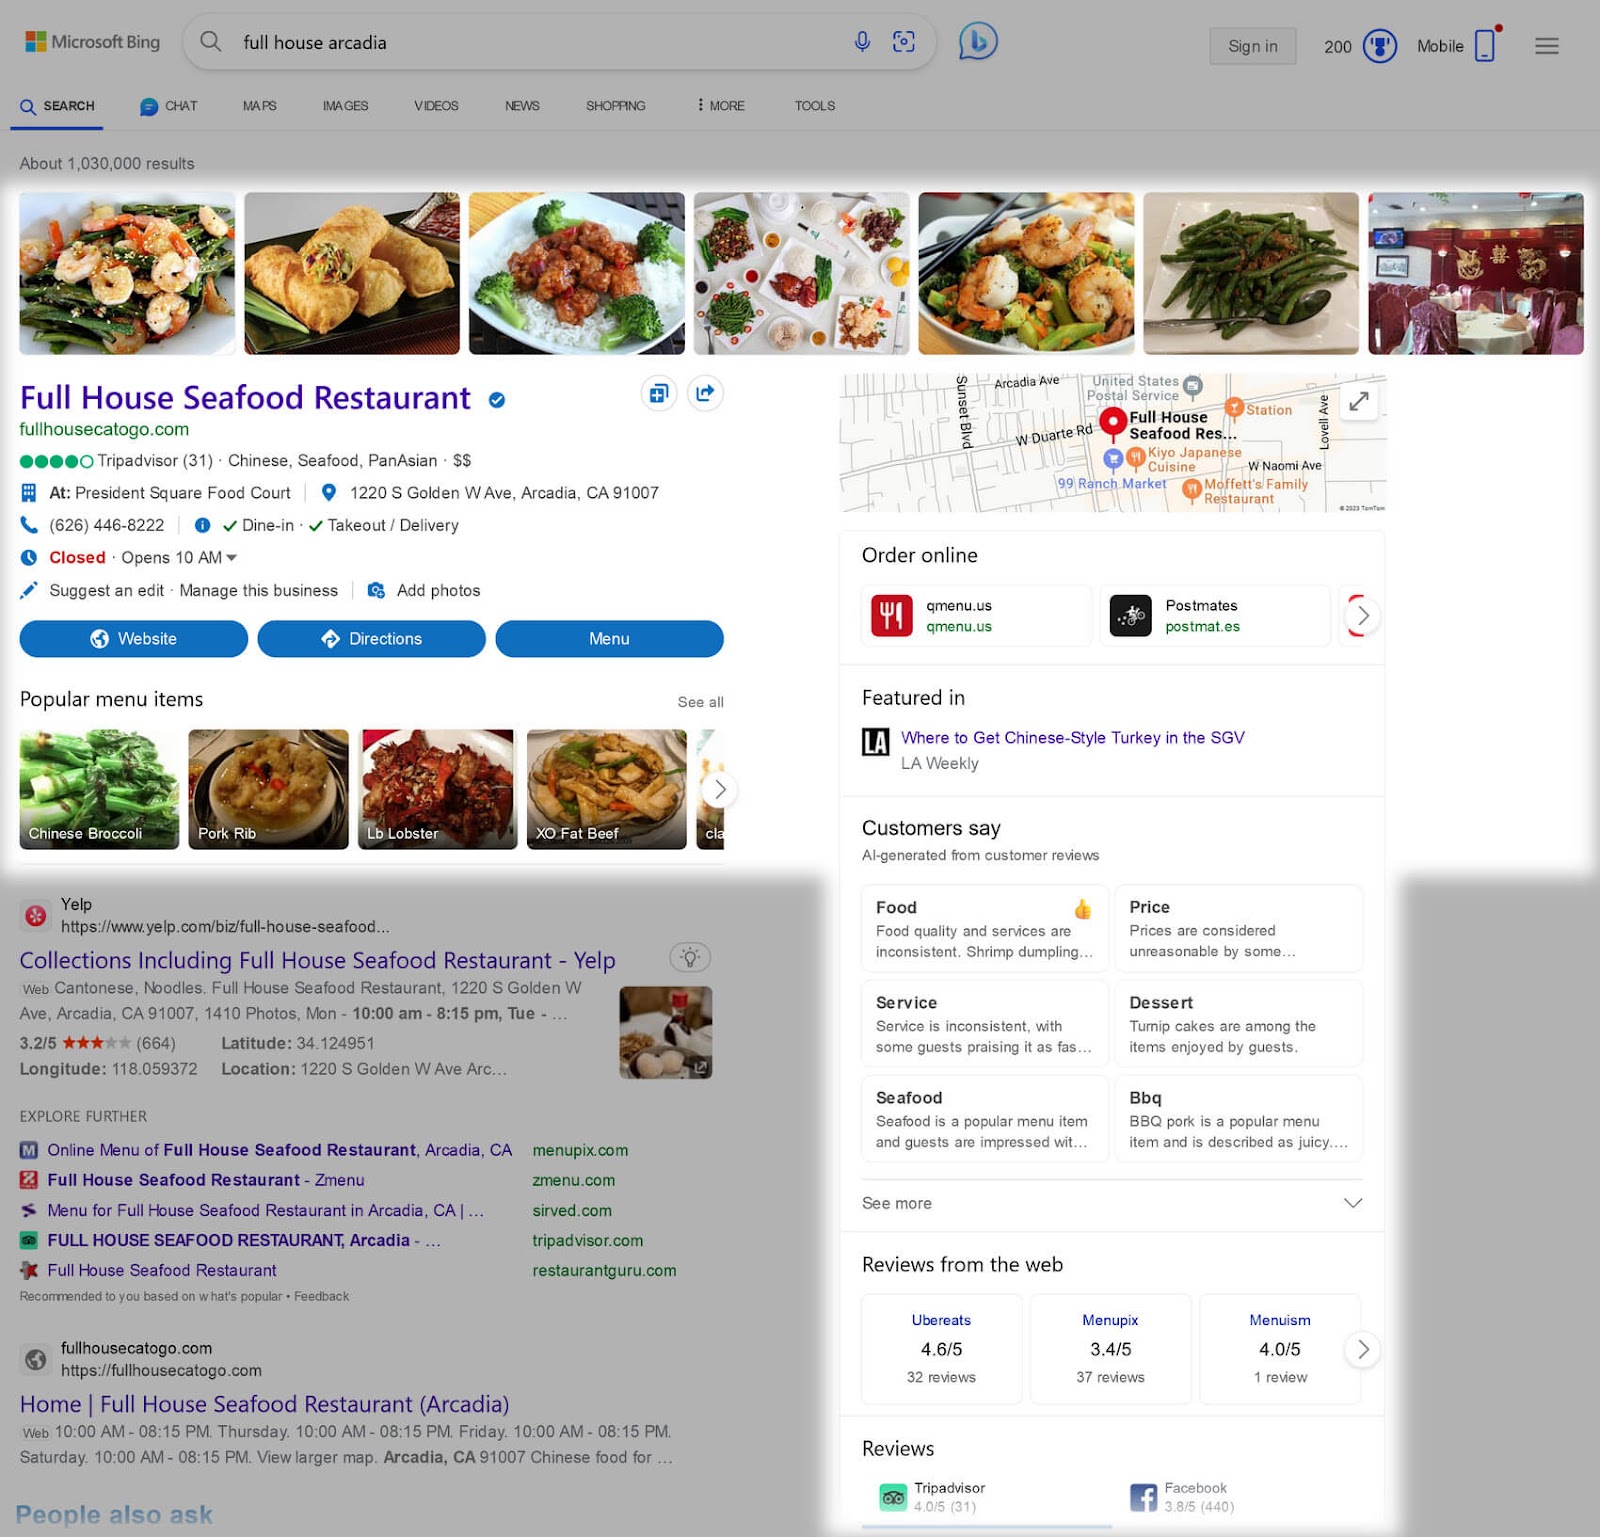 "Full House Seafood Restaurant" successful  Bing’s hunt  results